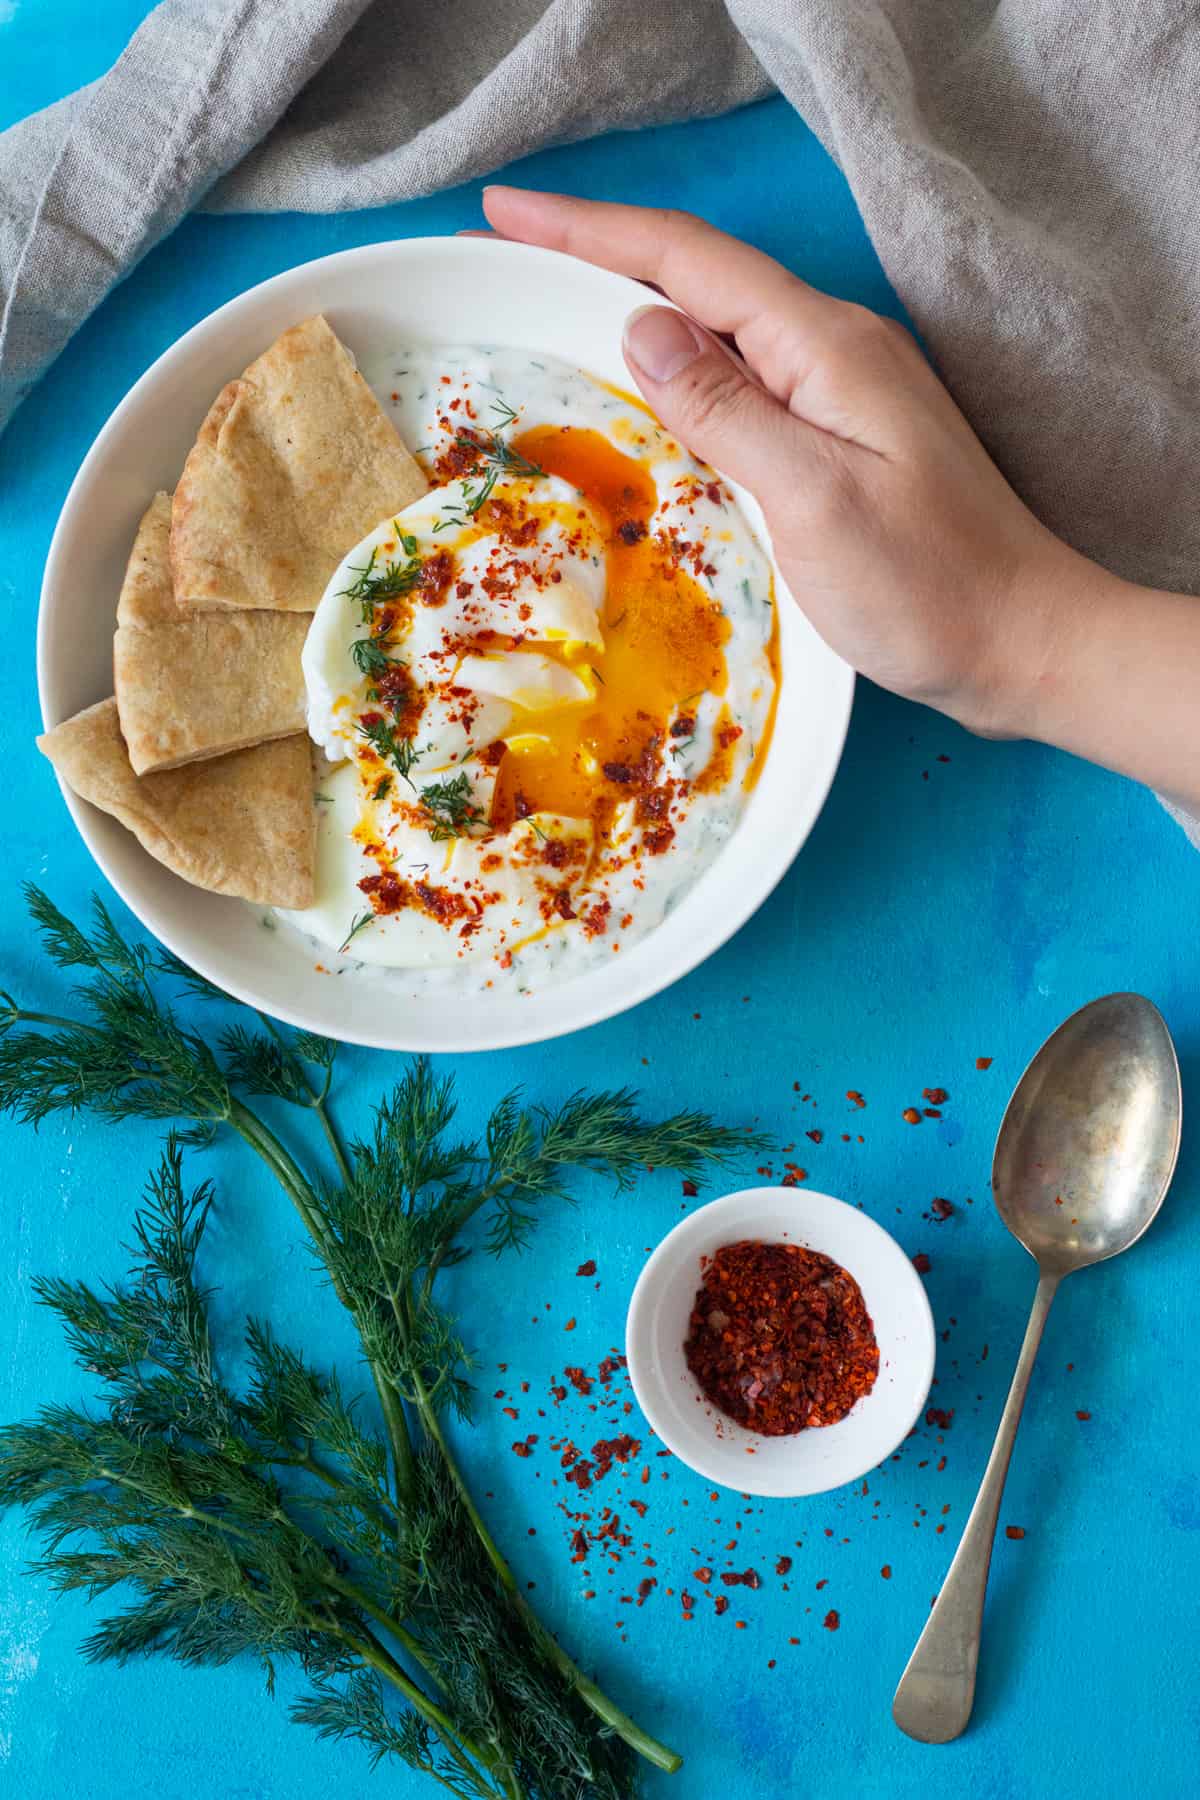 Cilbir is a complete dish on it's own. However, I always enjoy a slice of toasted bread like sourdough with it. Turkish eggs can also be served with warm lavash or pita bread.